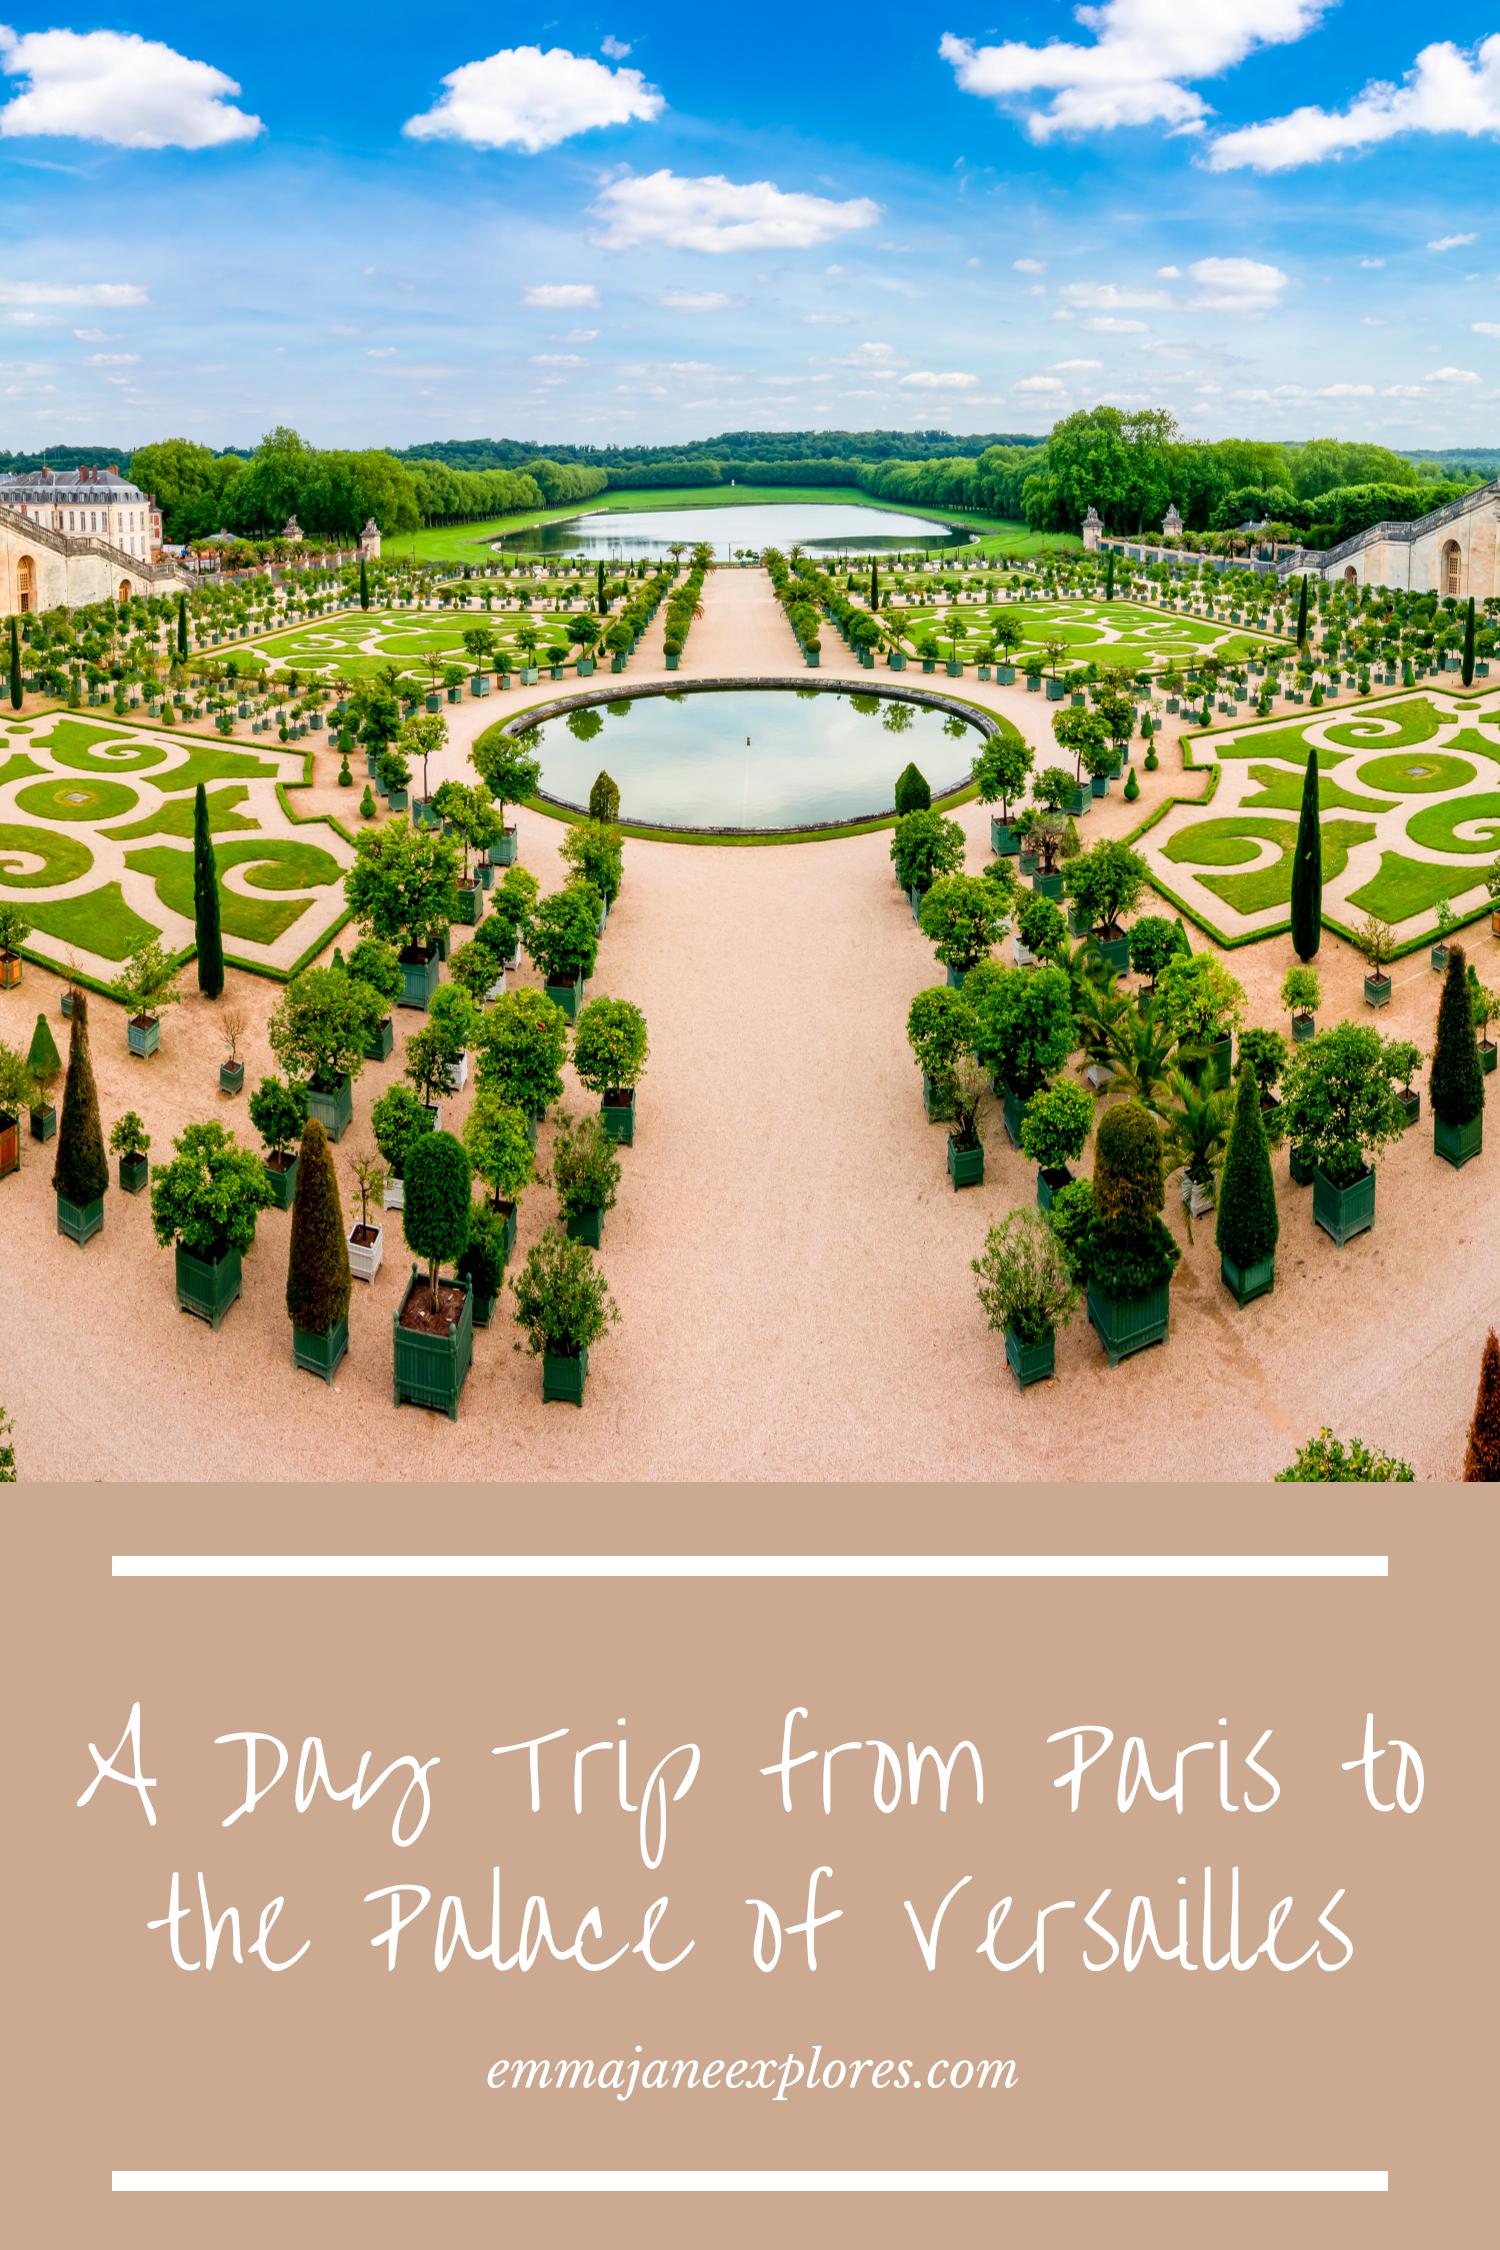 How To Get From Paris to Versailles - Emma Jane Explores